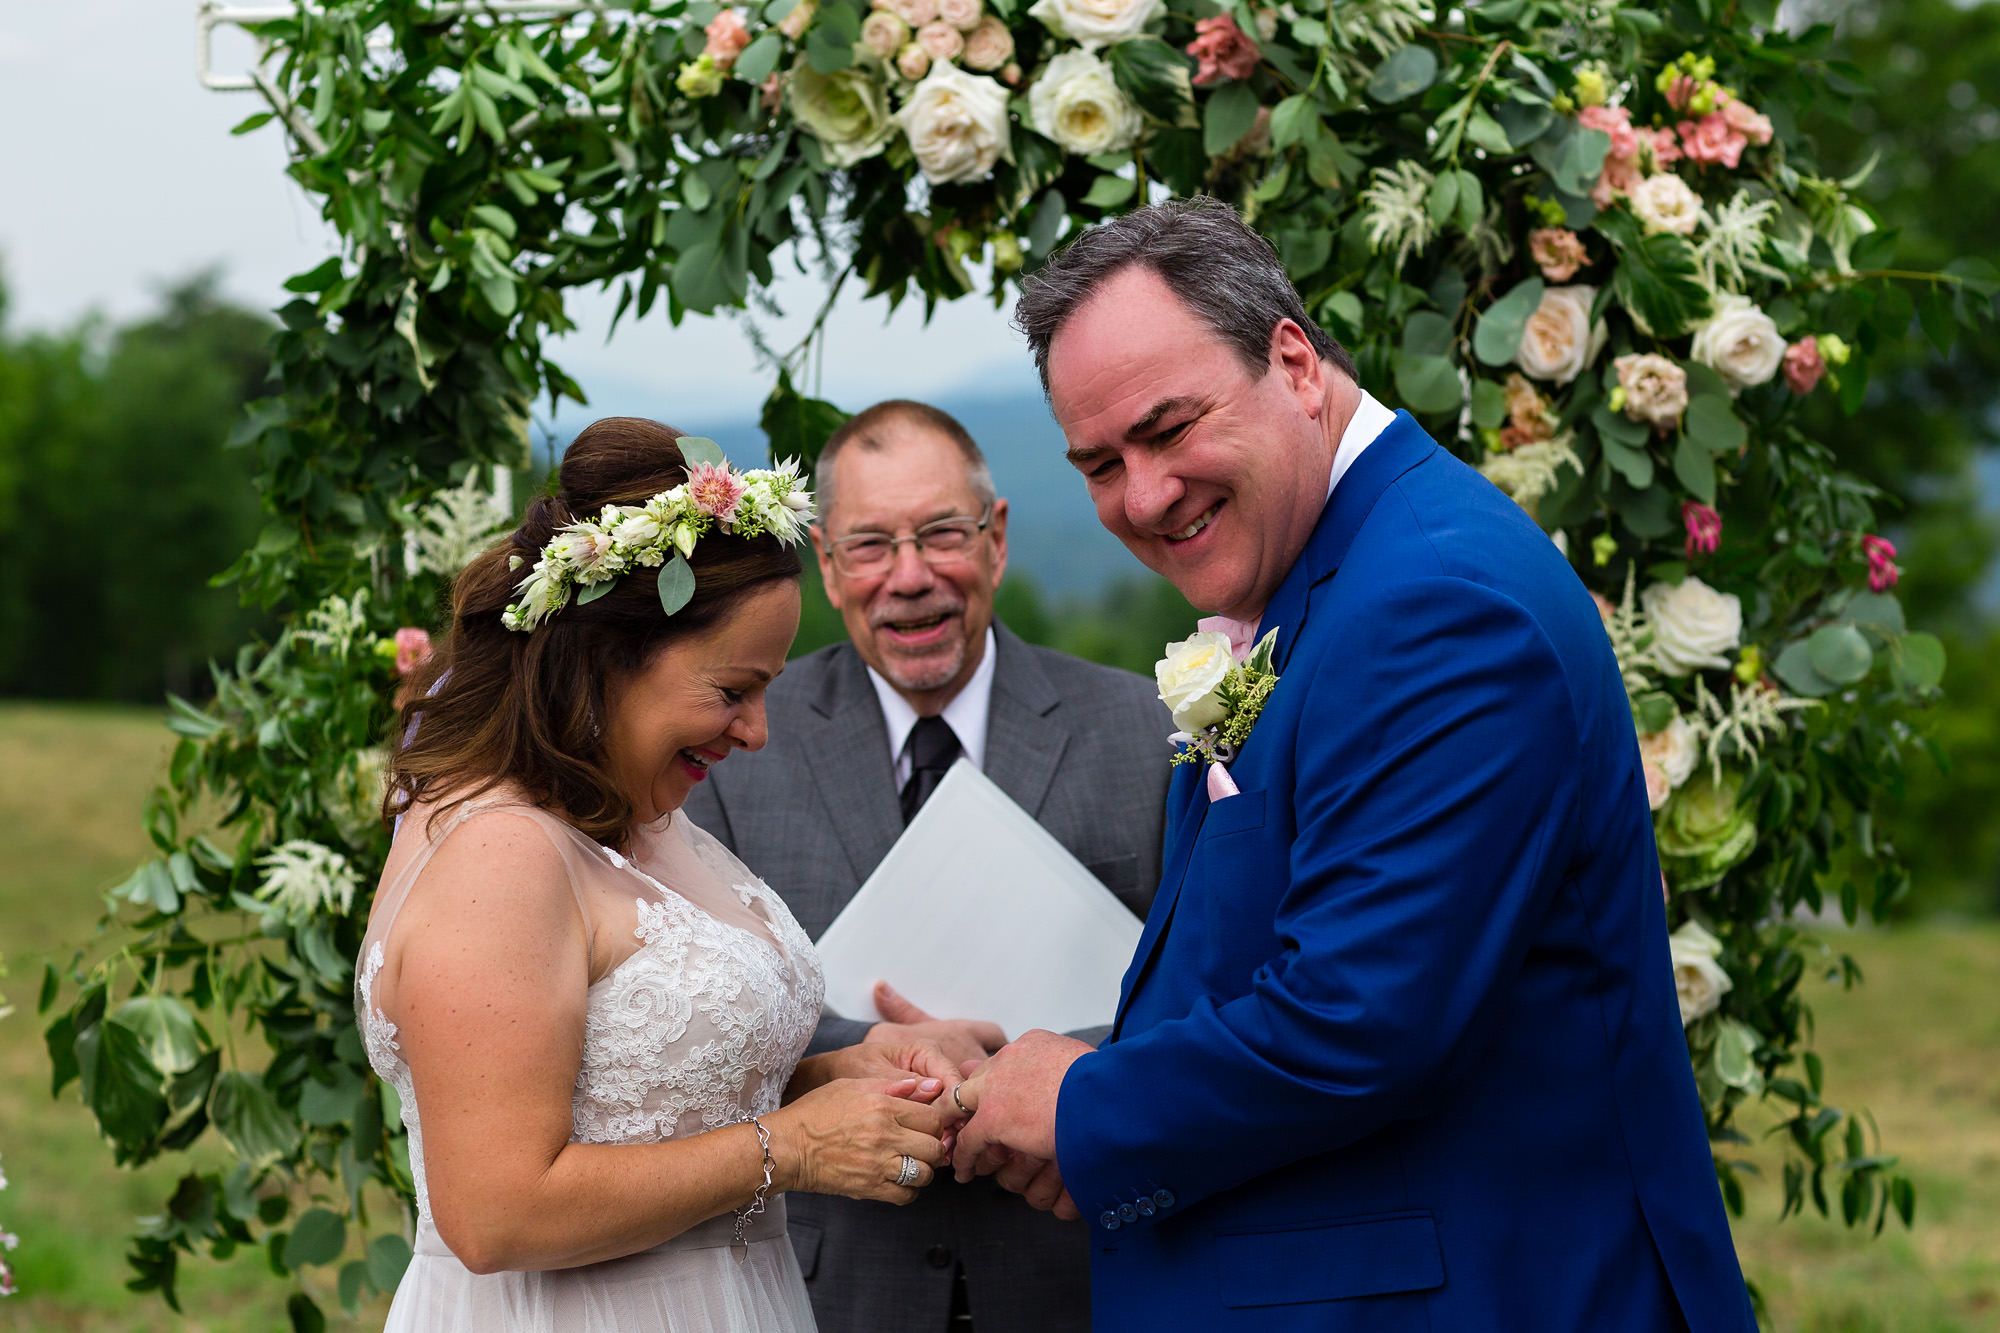 An emotional wedding ceremony in Sugar Hill, New Hampshire